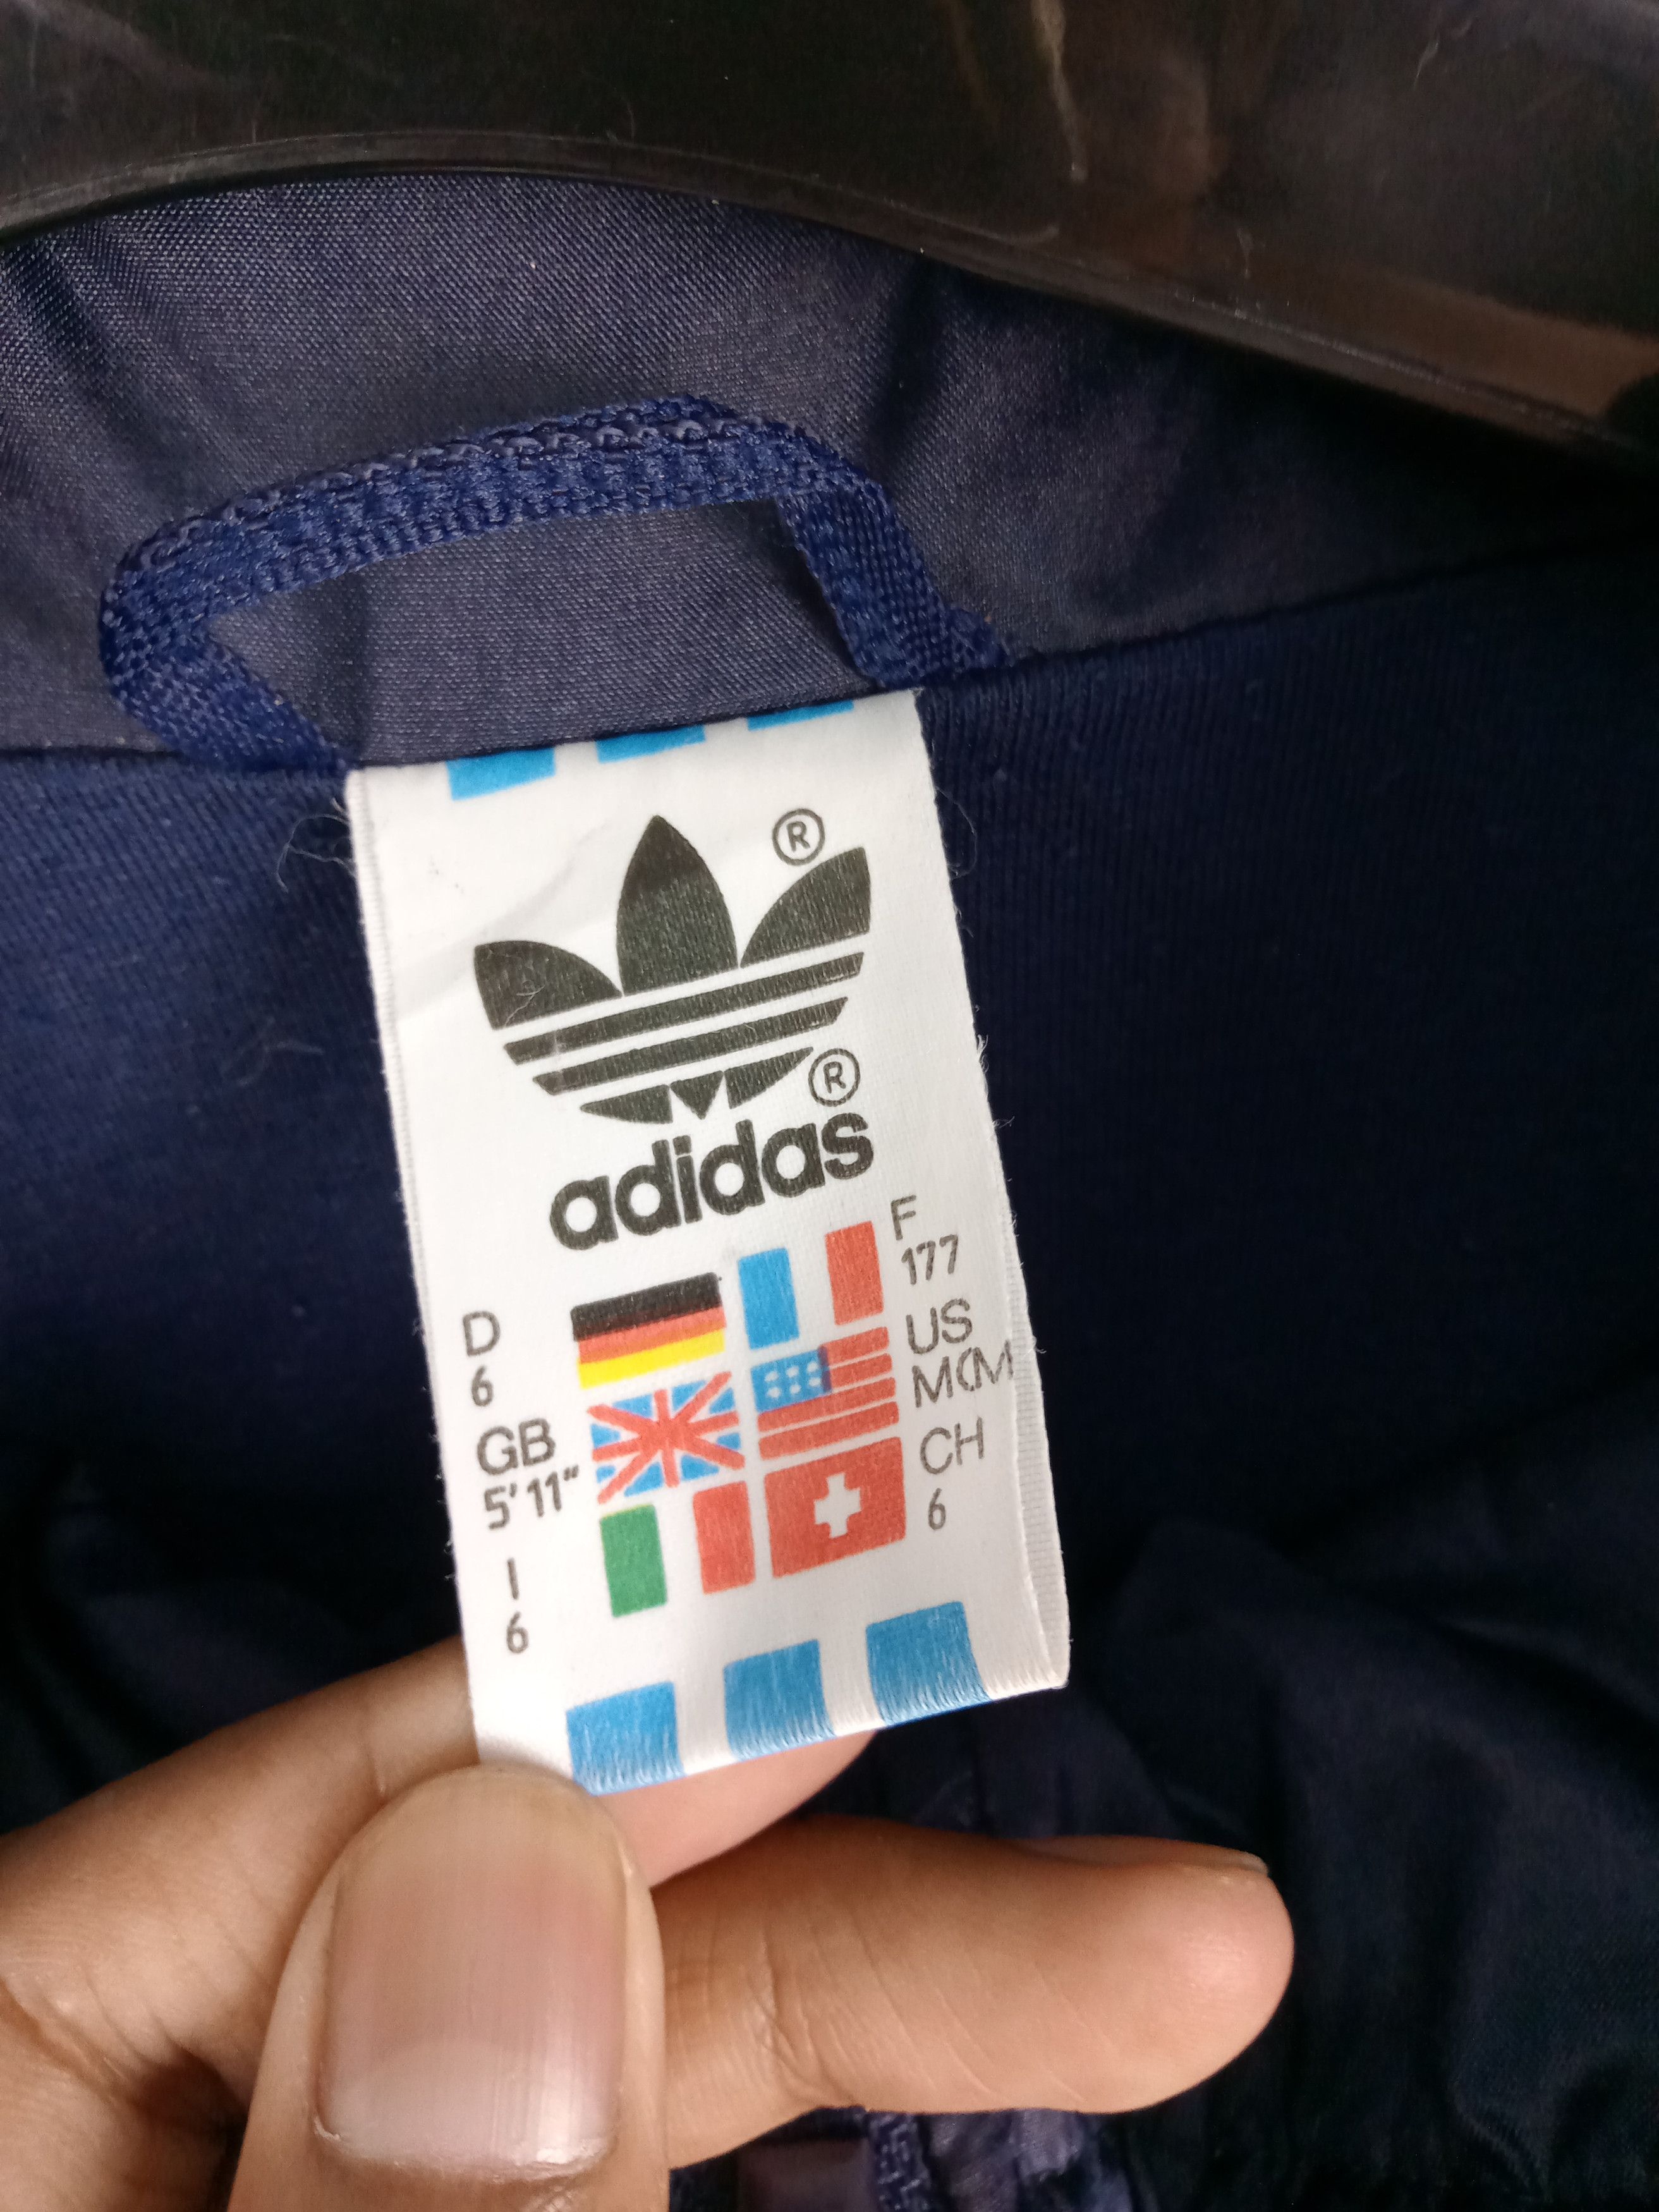 Adidas Vintage 70s Adidas Jacet Made In West Germany Size US M / EU 48-50 / 2 - 6 Thumbnail